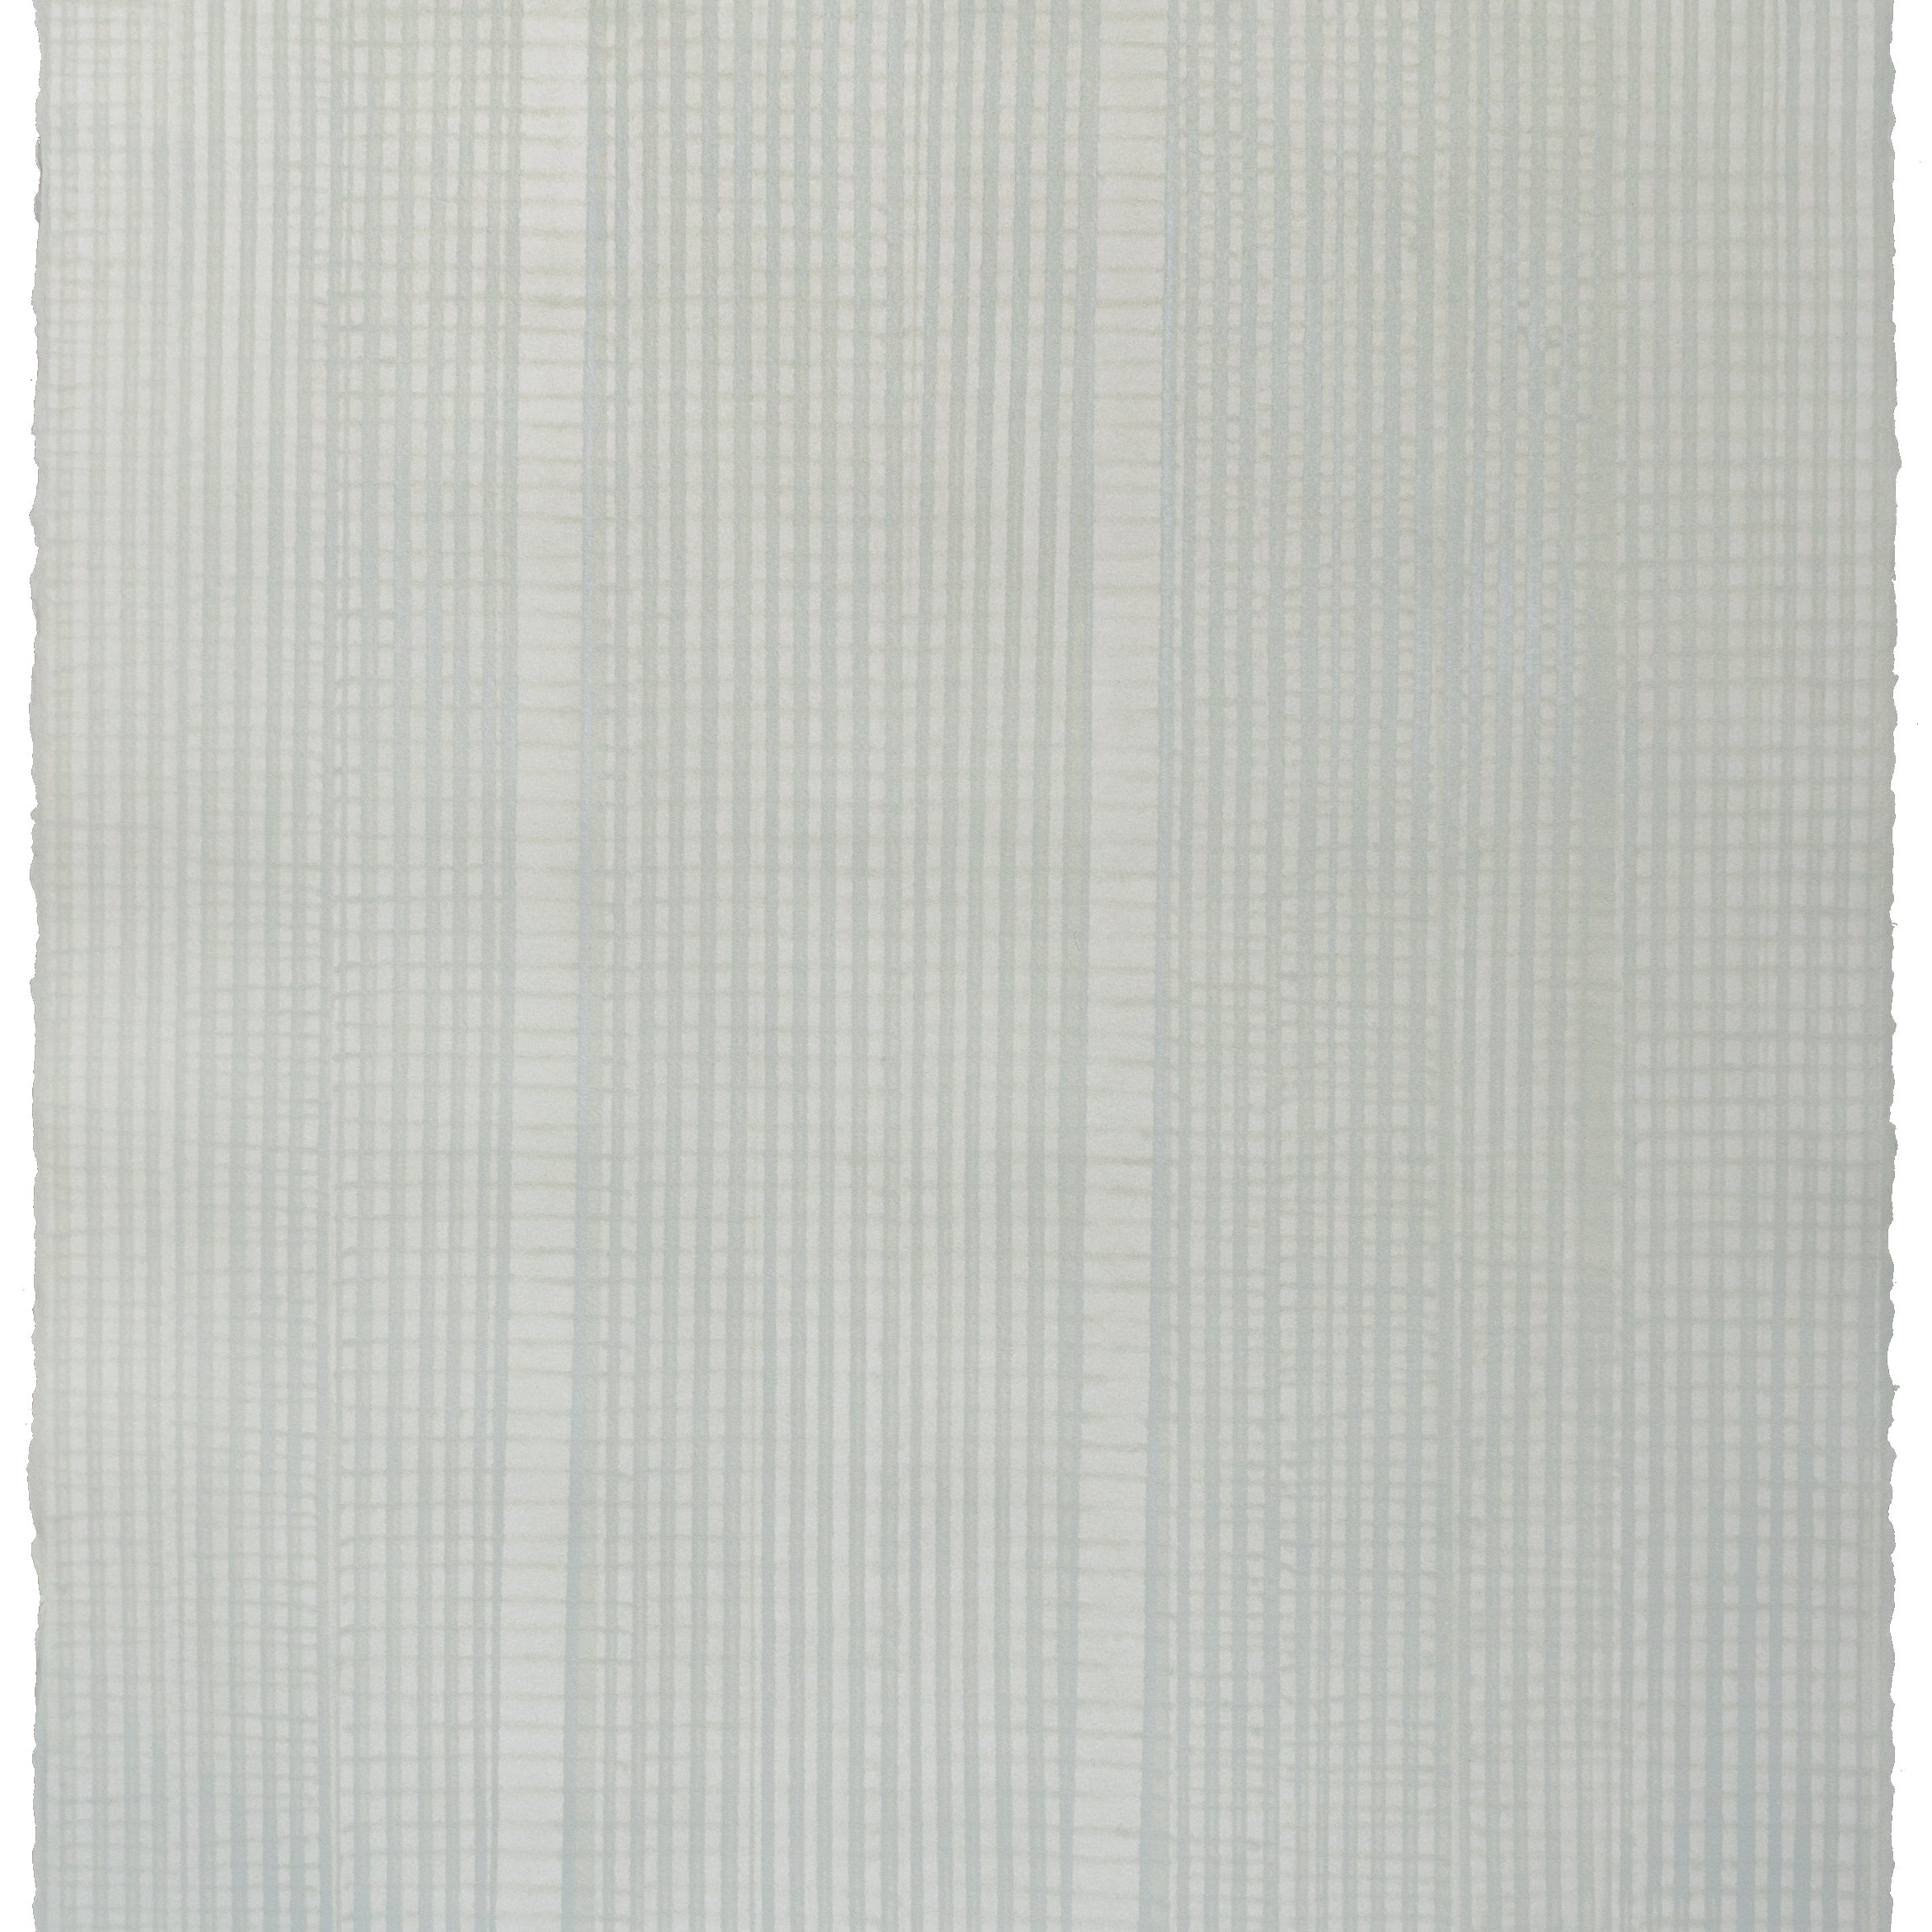 Sheet of hand-painted wallpaper with an irregular grid pattern in light gray on a cream field.